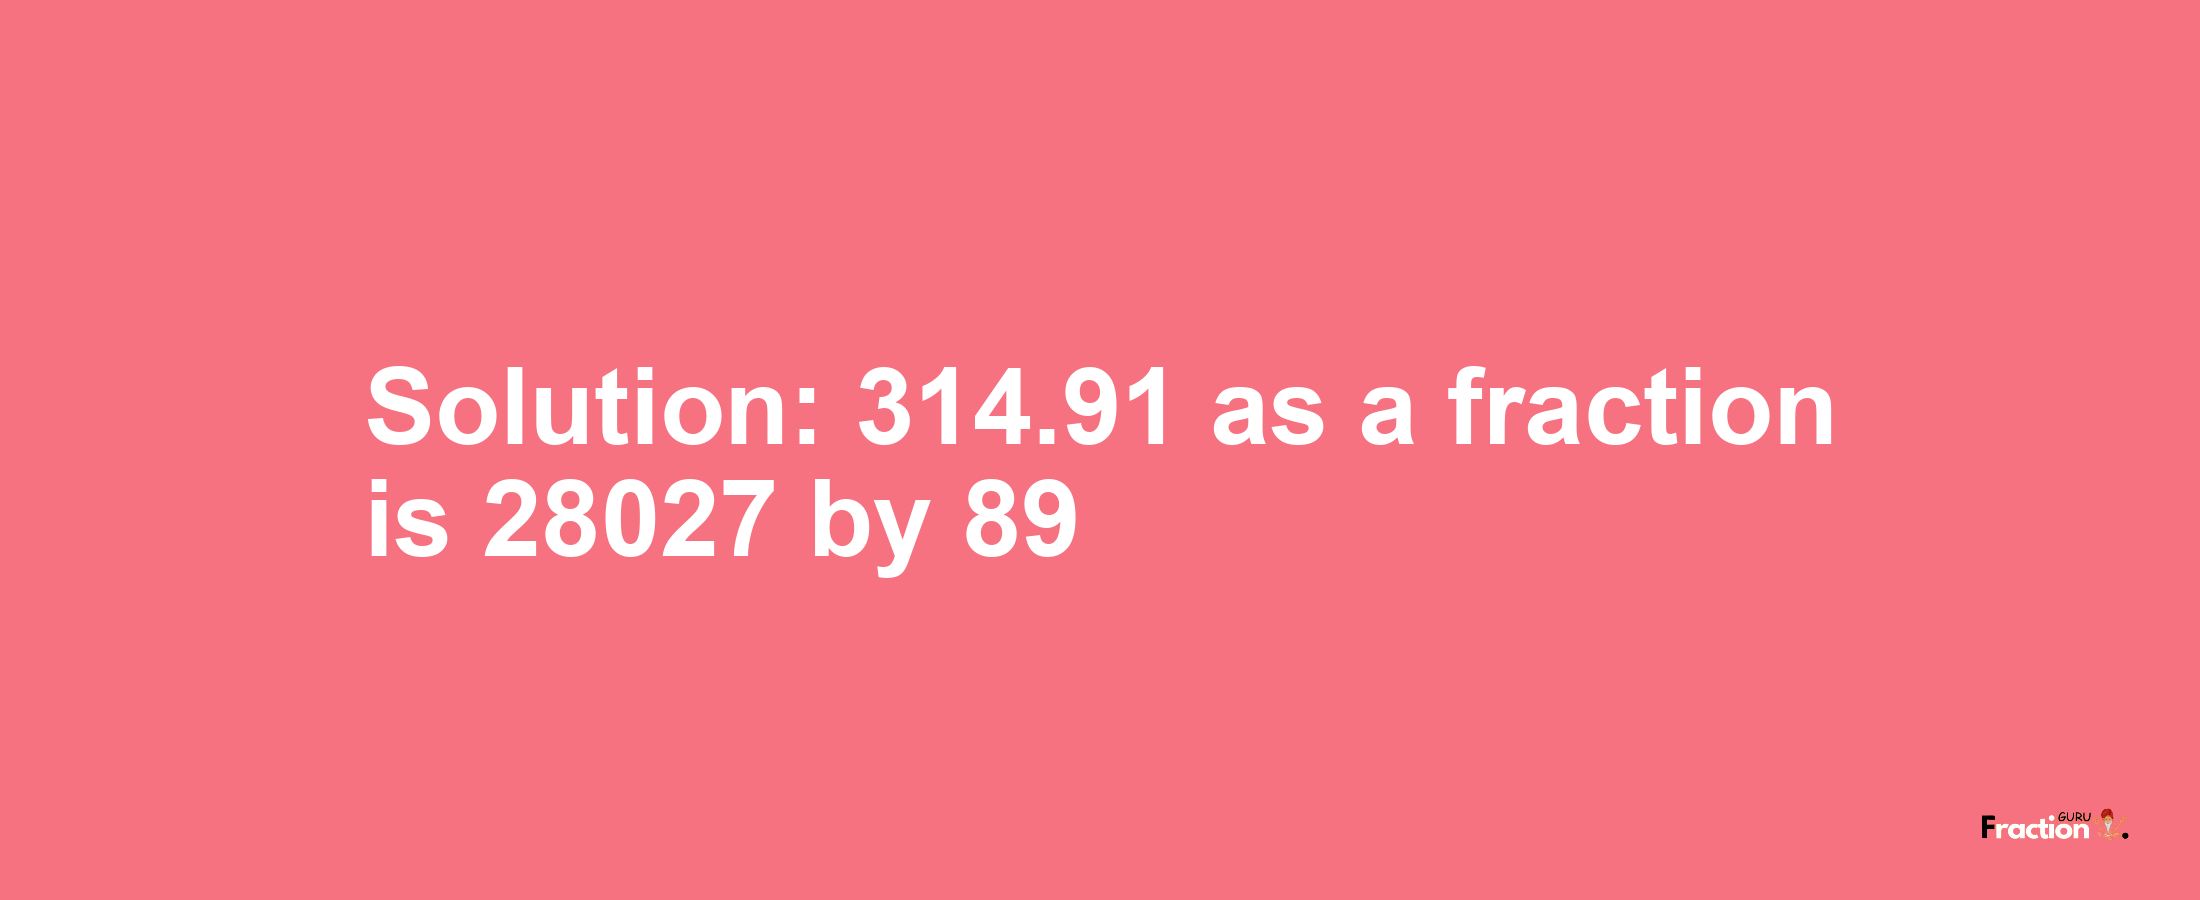 Solution:314.91 as a fraction is 28027/89